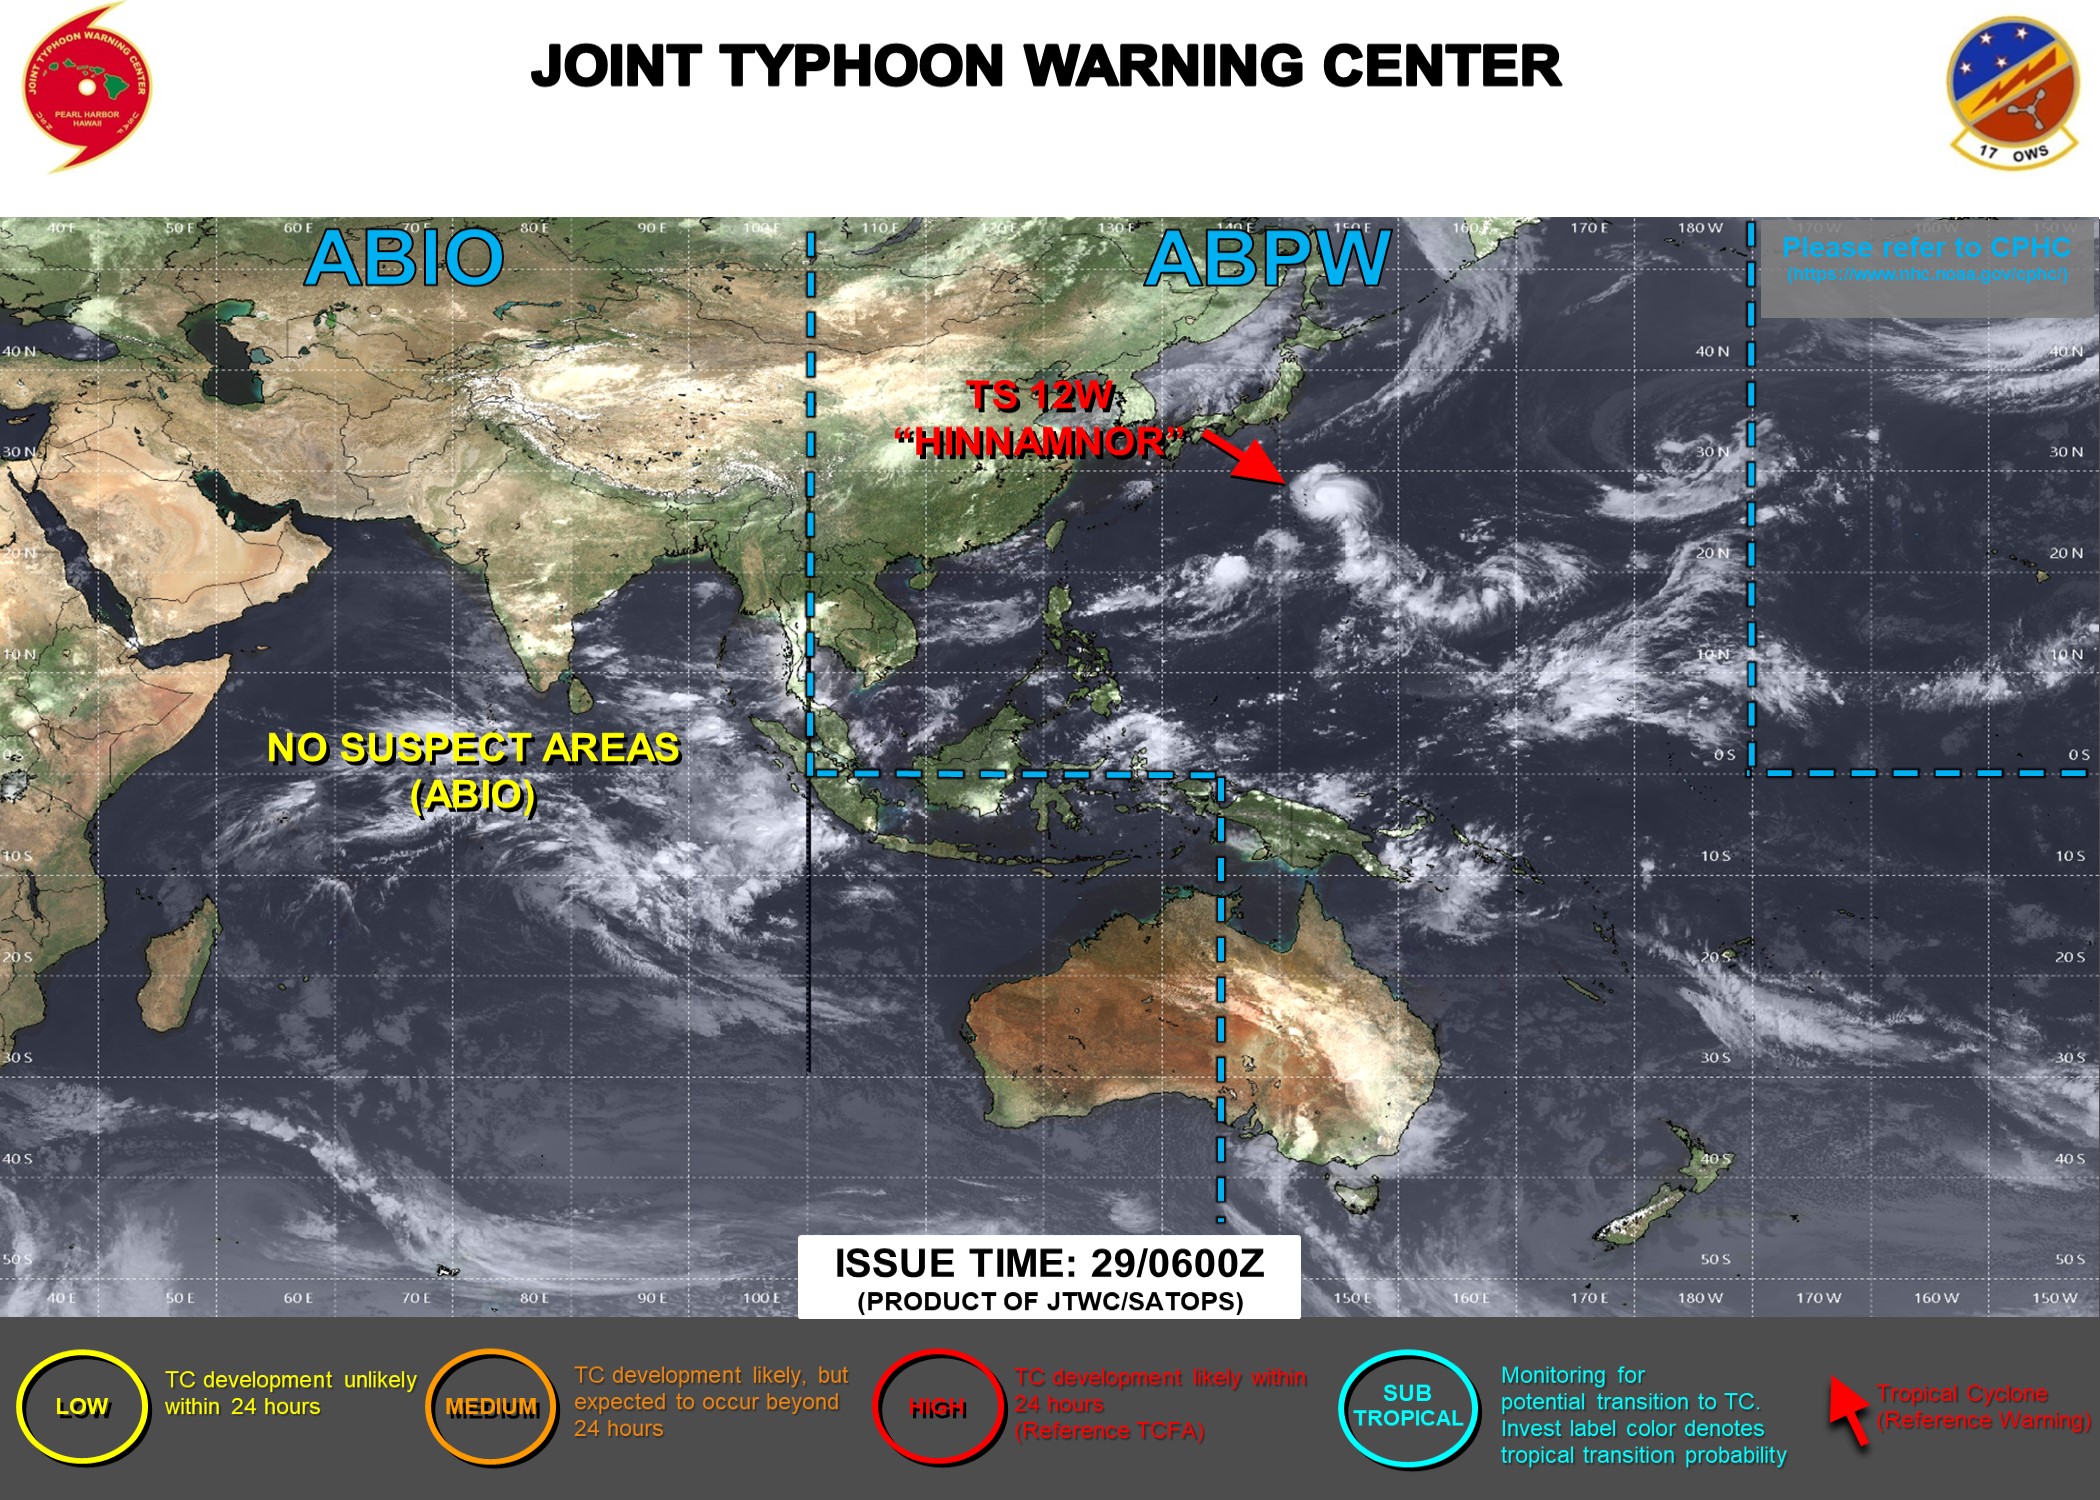 JTWC IS ISSUING 6HOURLY WARNINGS AND 3HOURLY SATELLITE BULLETINS ON TY 12W.